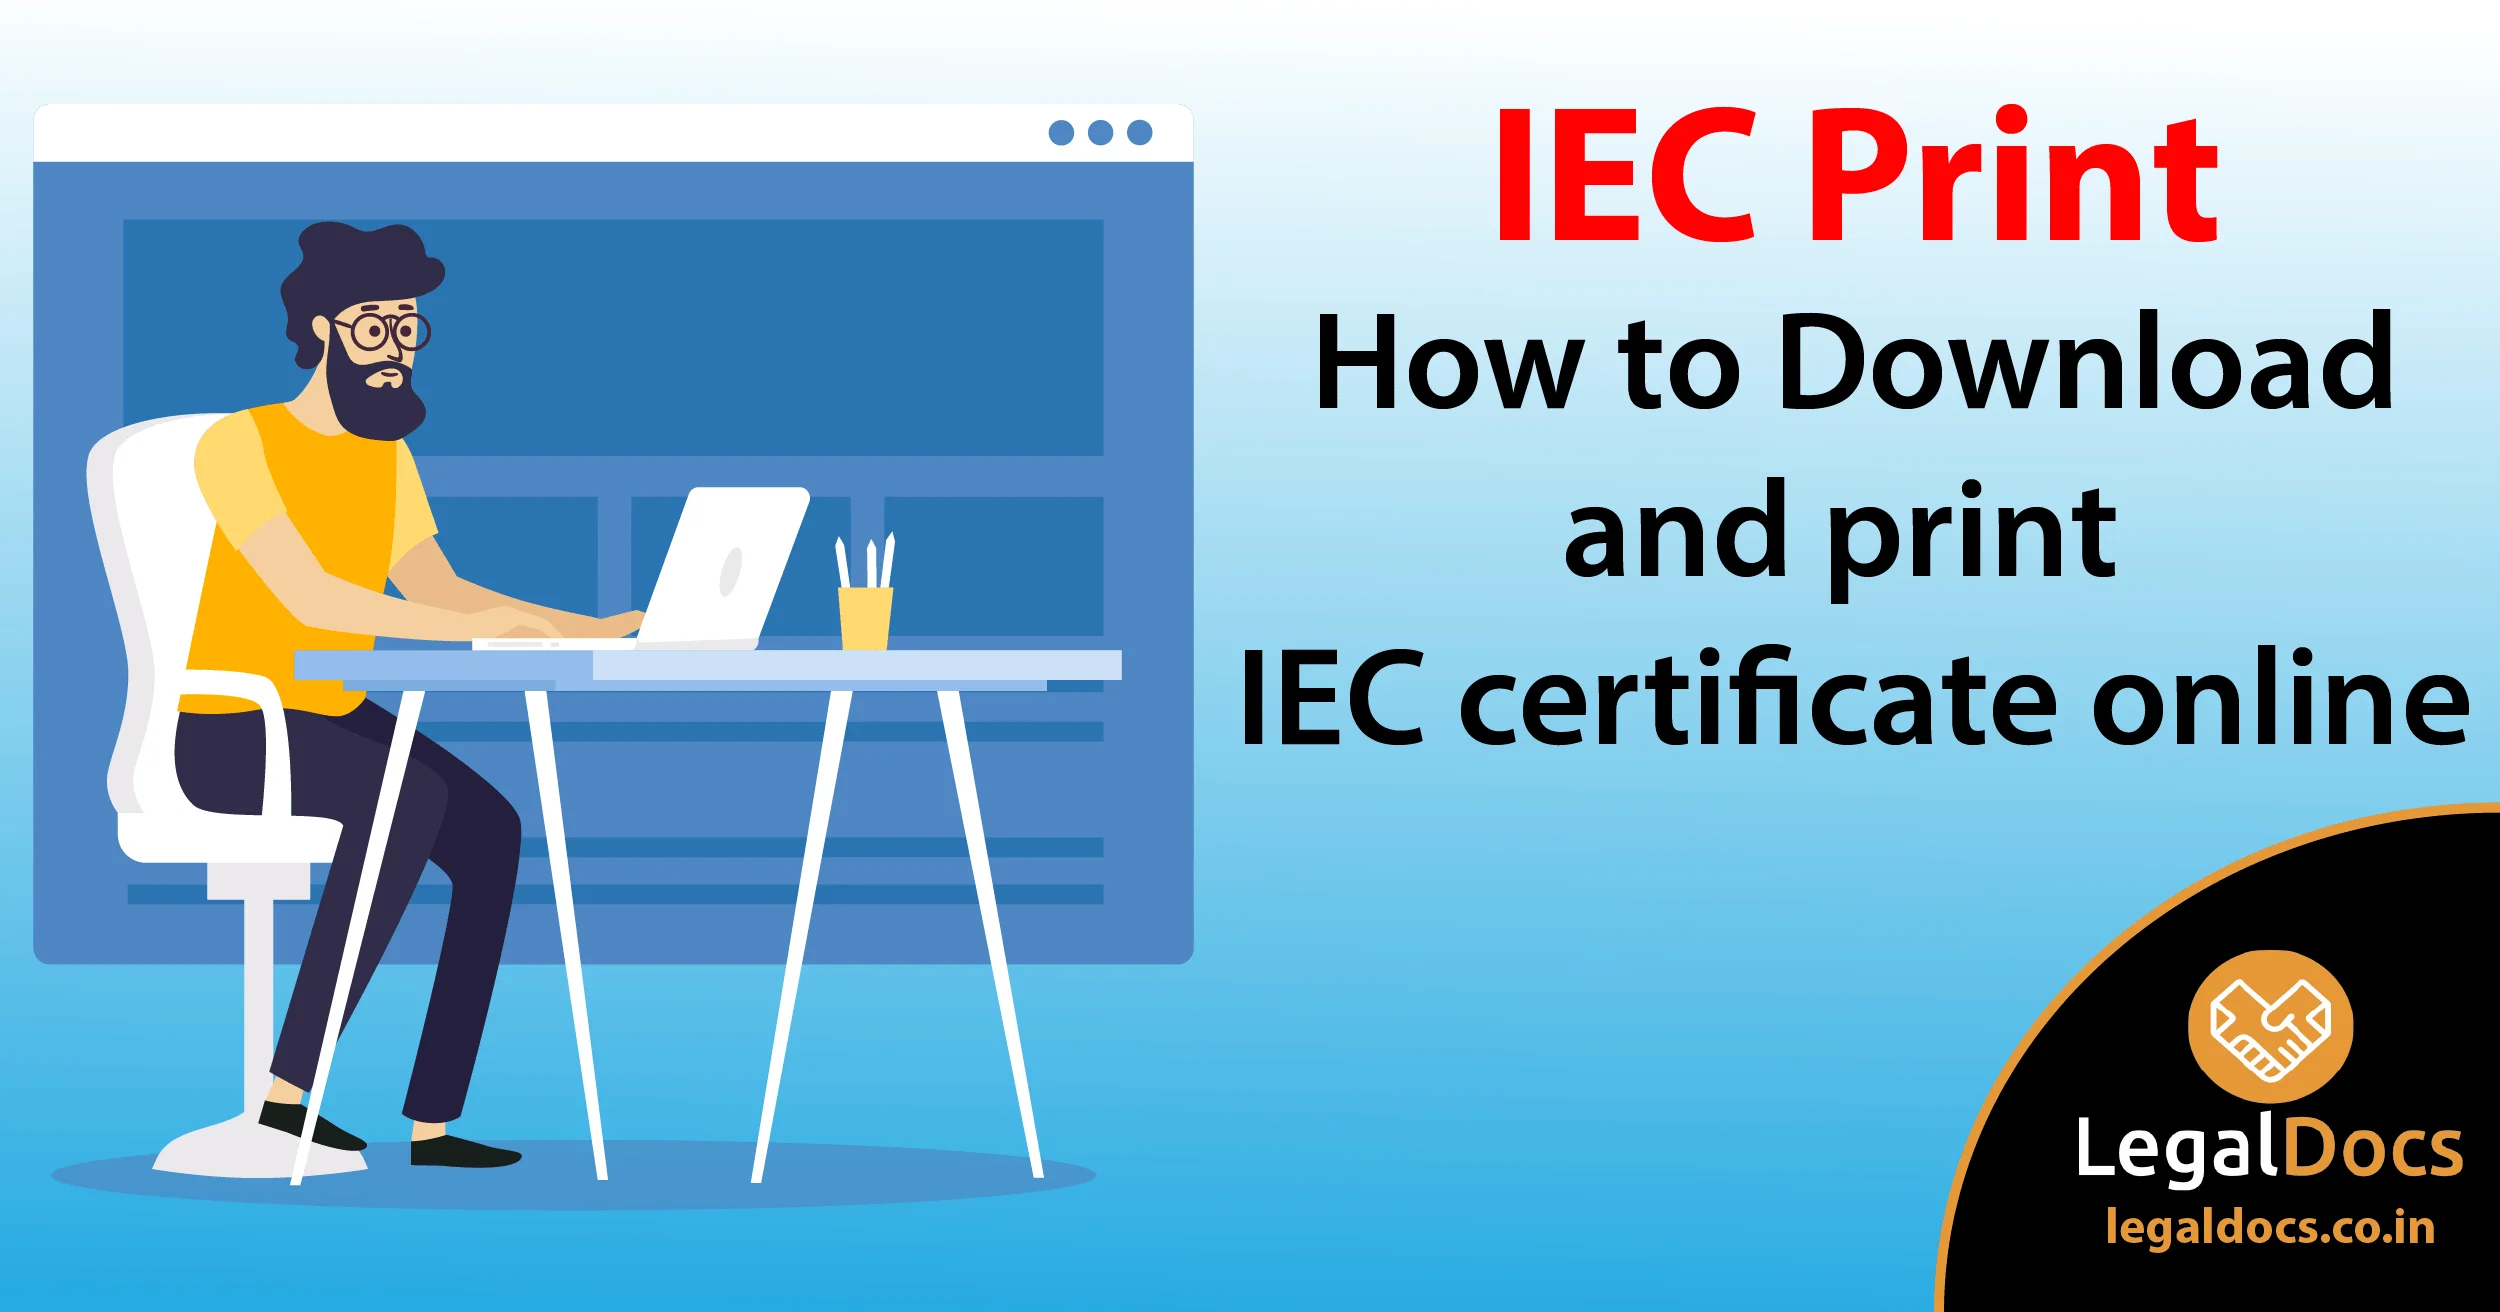  IEC Print - How to Download and Print IEC Certificate Online